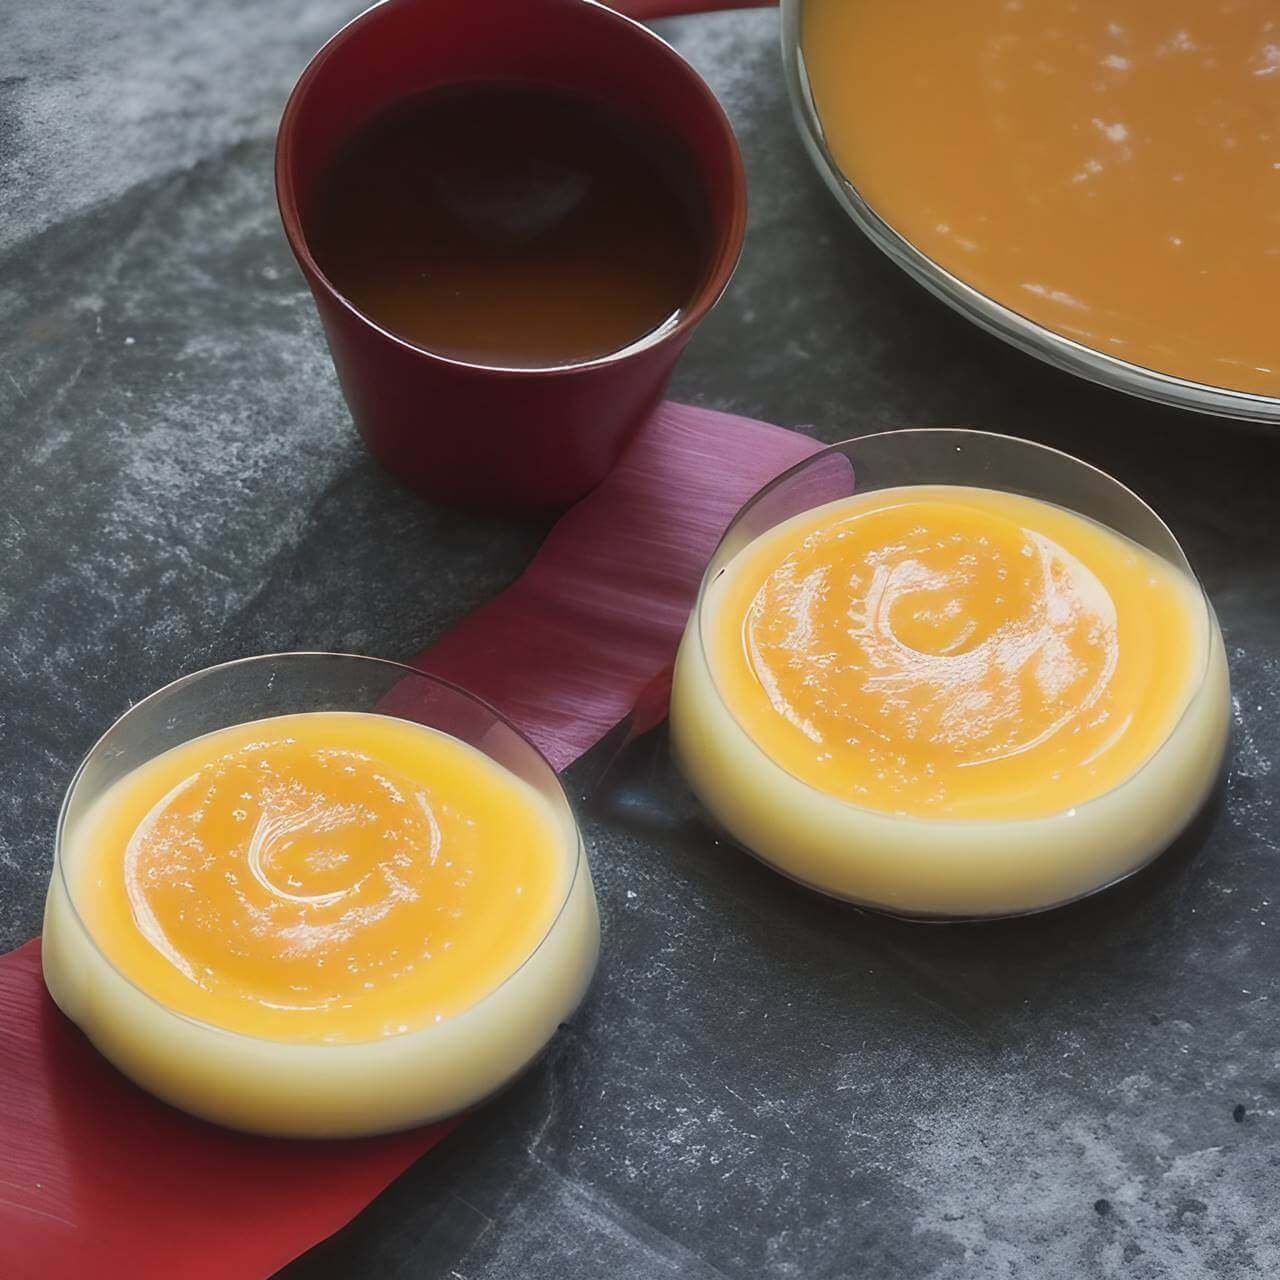 Leche Flan in small bowl